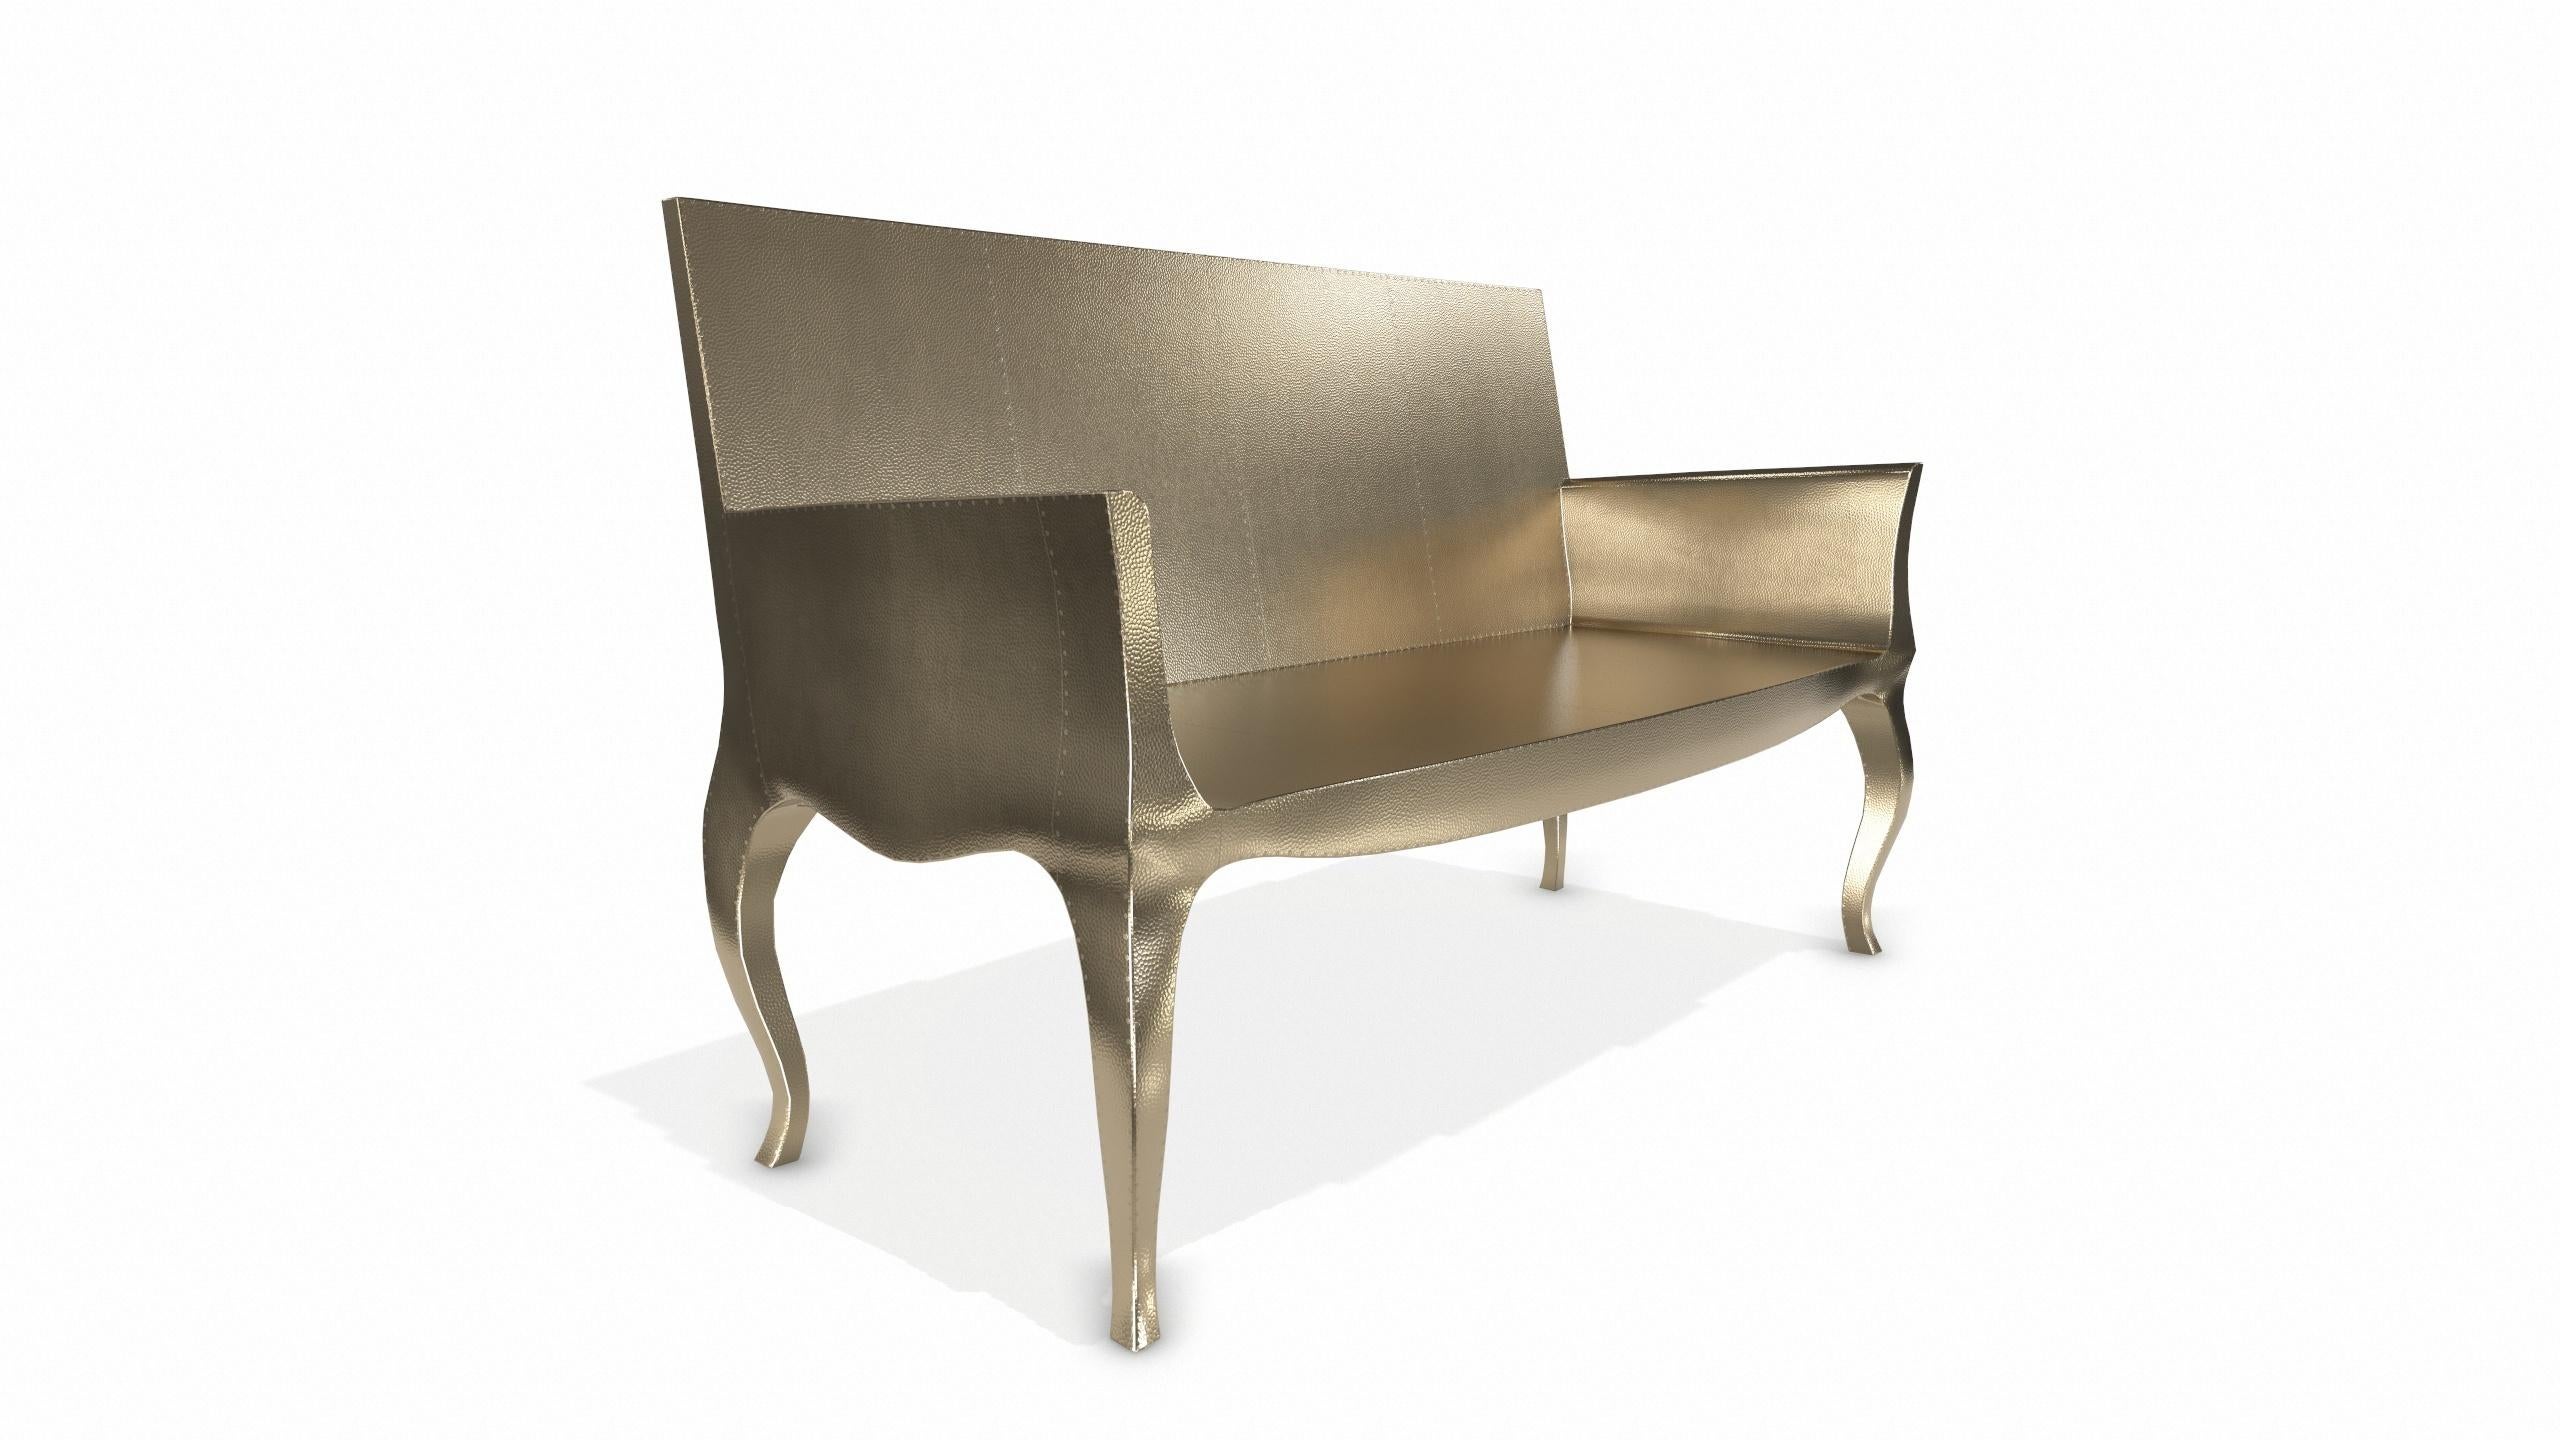 Louise Settee Art Deco Settees in Mid. Hammered Brass by Paul Mathieu In New Condition For Sale In New York, NY